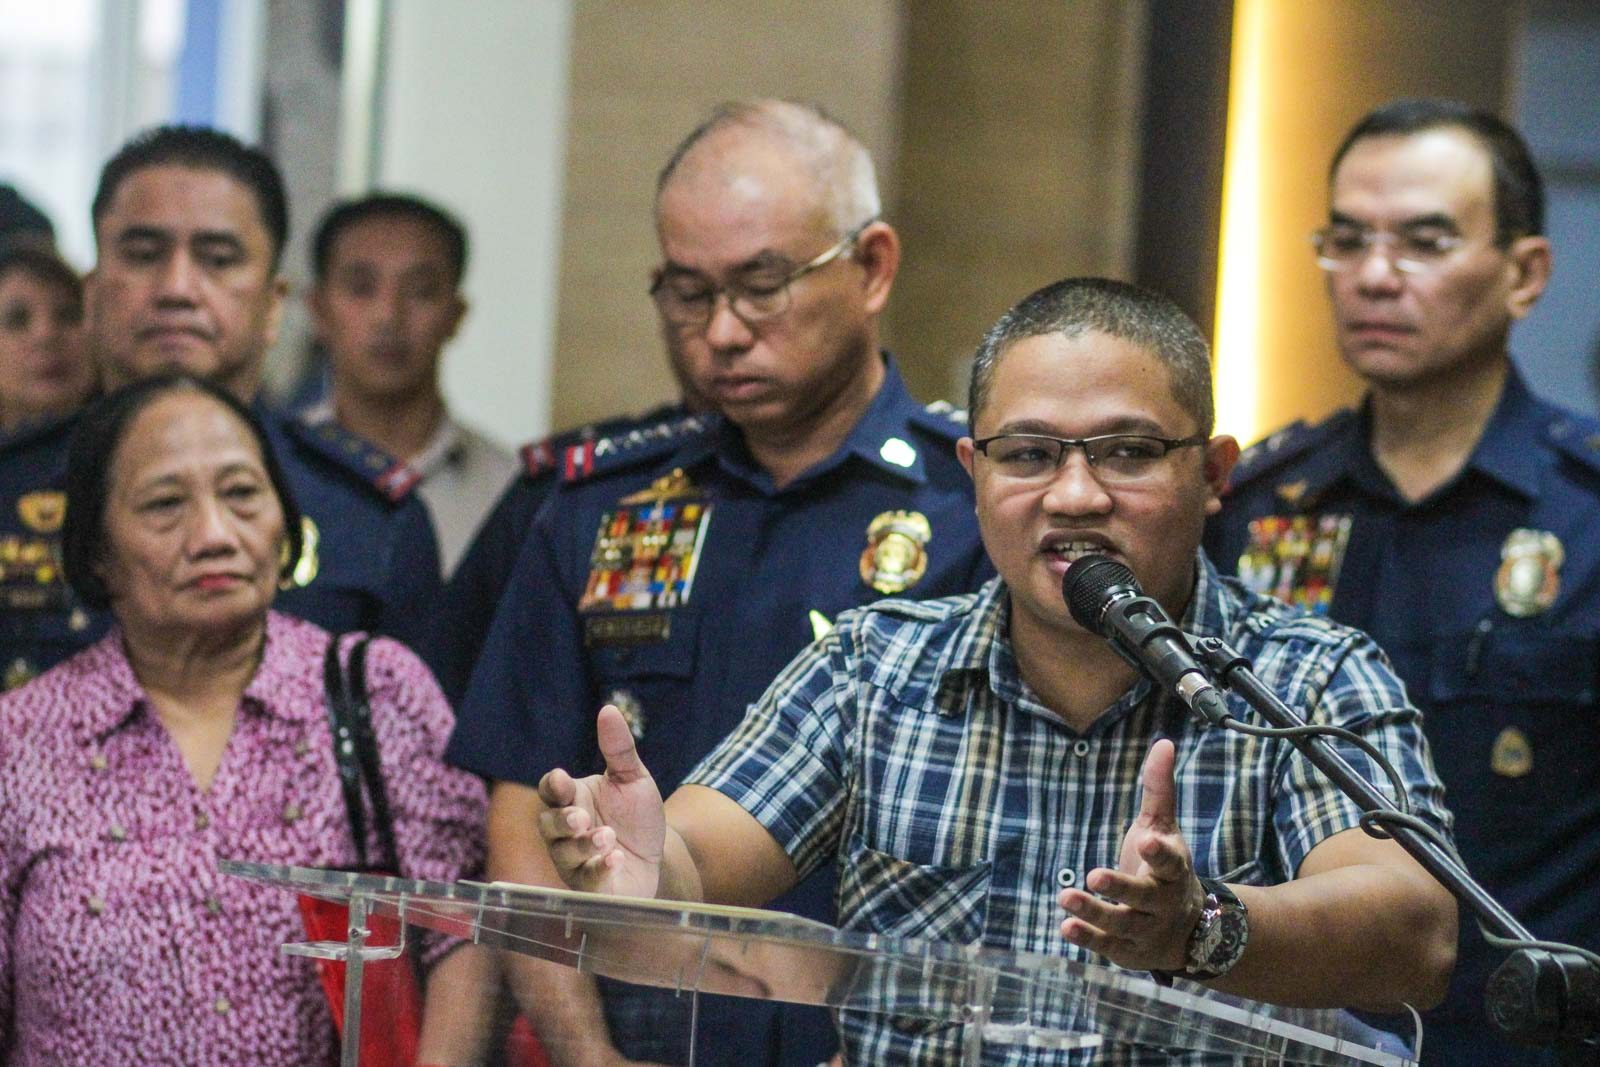 Peter Joemel Advincula, man who claims to be Bikoy, surrenders